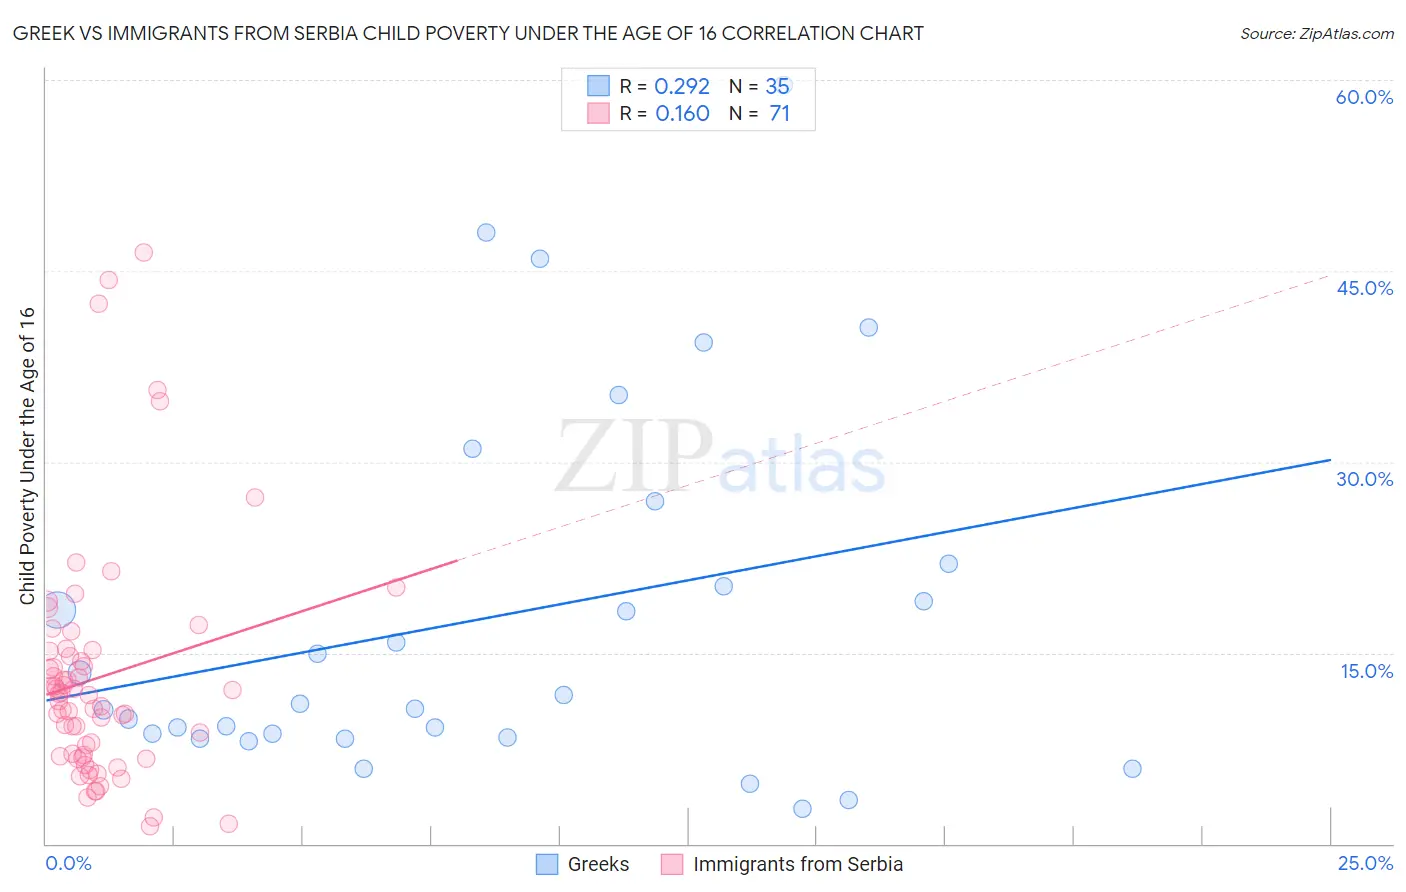 Greek vs Immigrants from Serbia Child Poverty Under the Age of 16